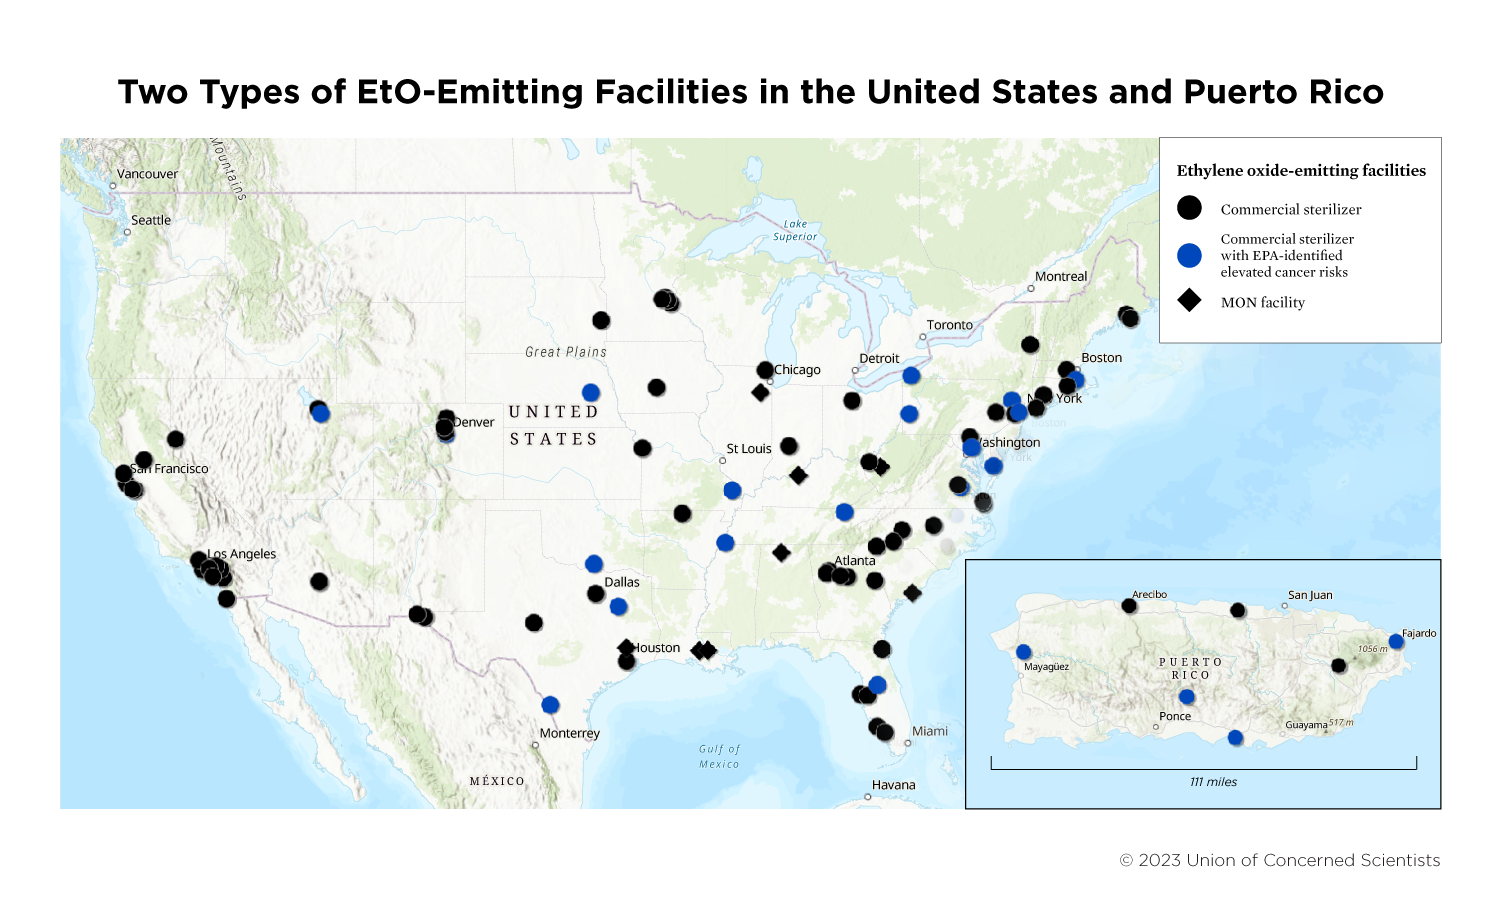 A map showing the locations of different ethylene oxide-emitting facilities in the United States and Puerto Rico.